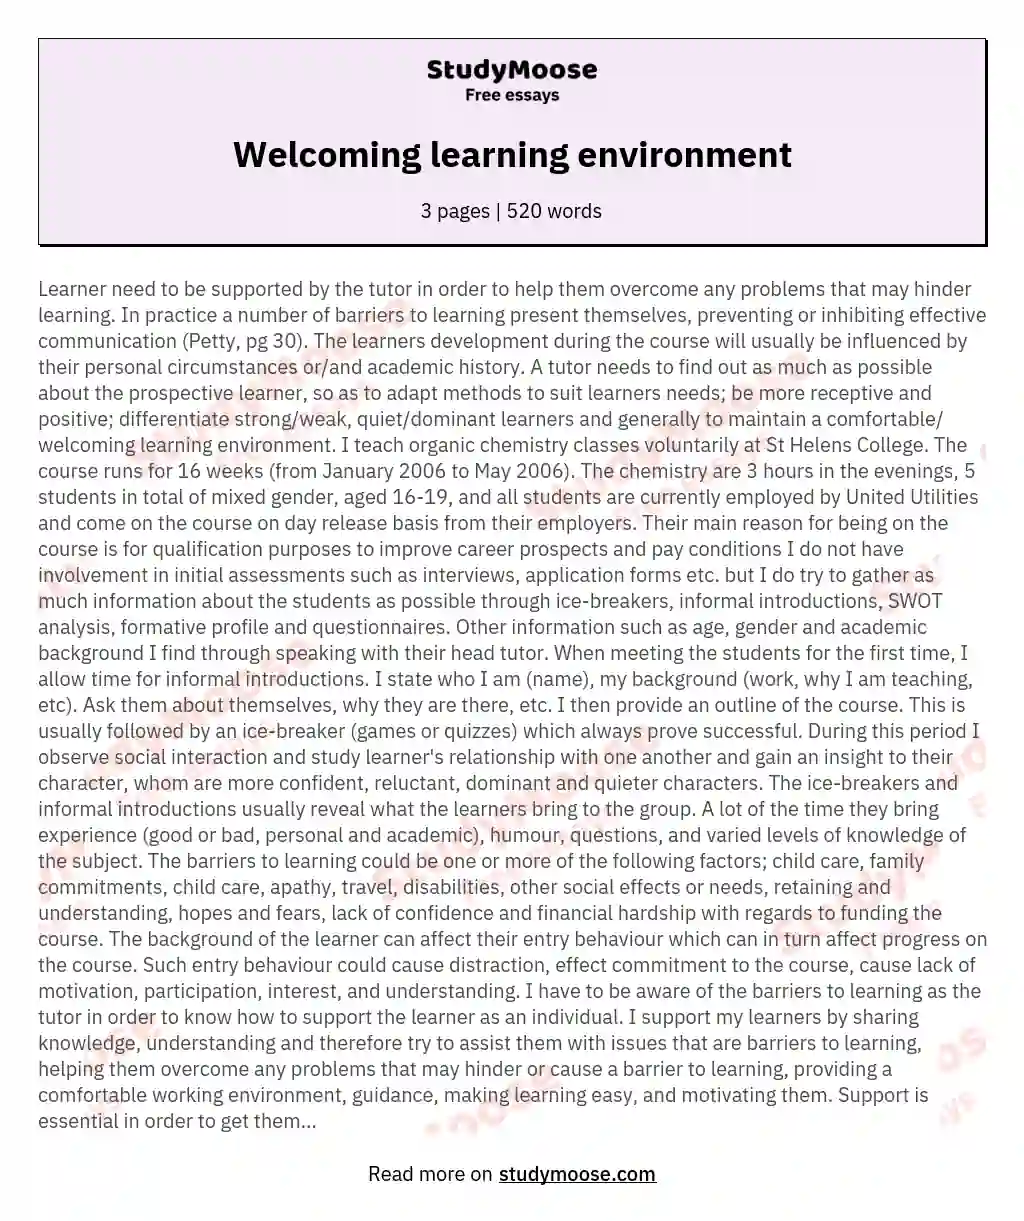 Welcoming learning environment essay